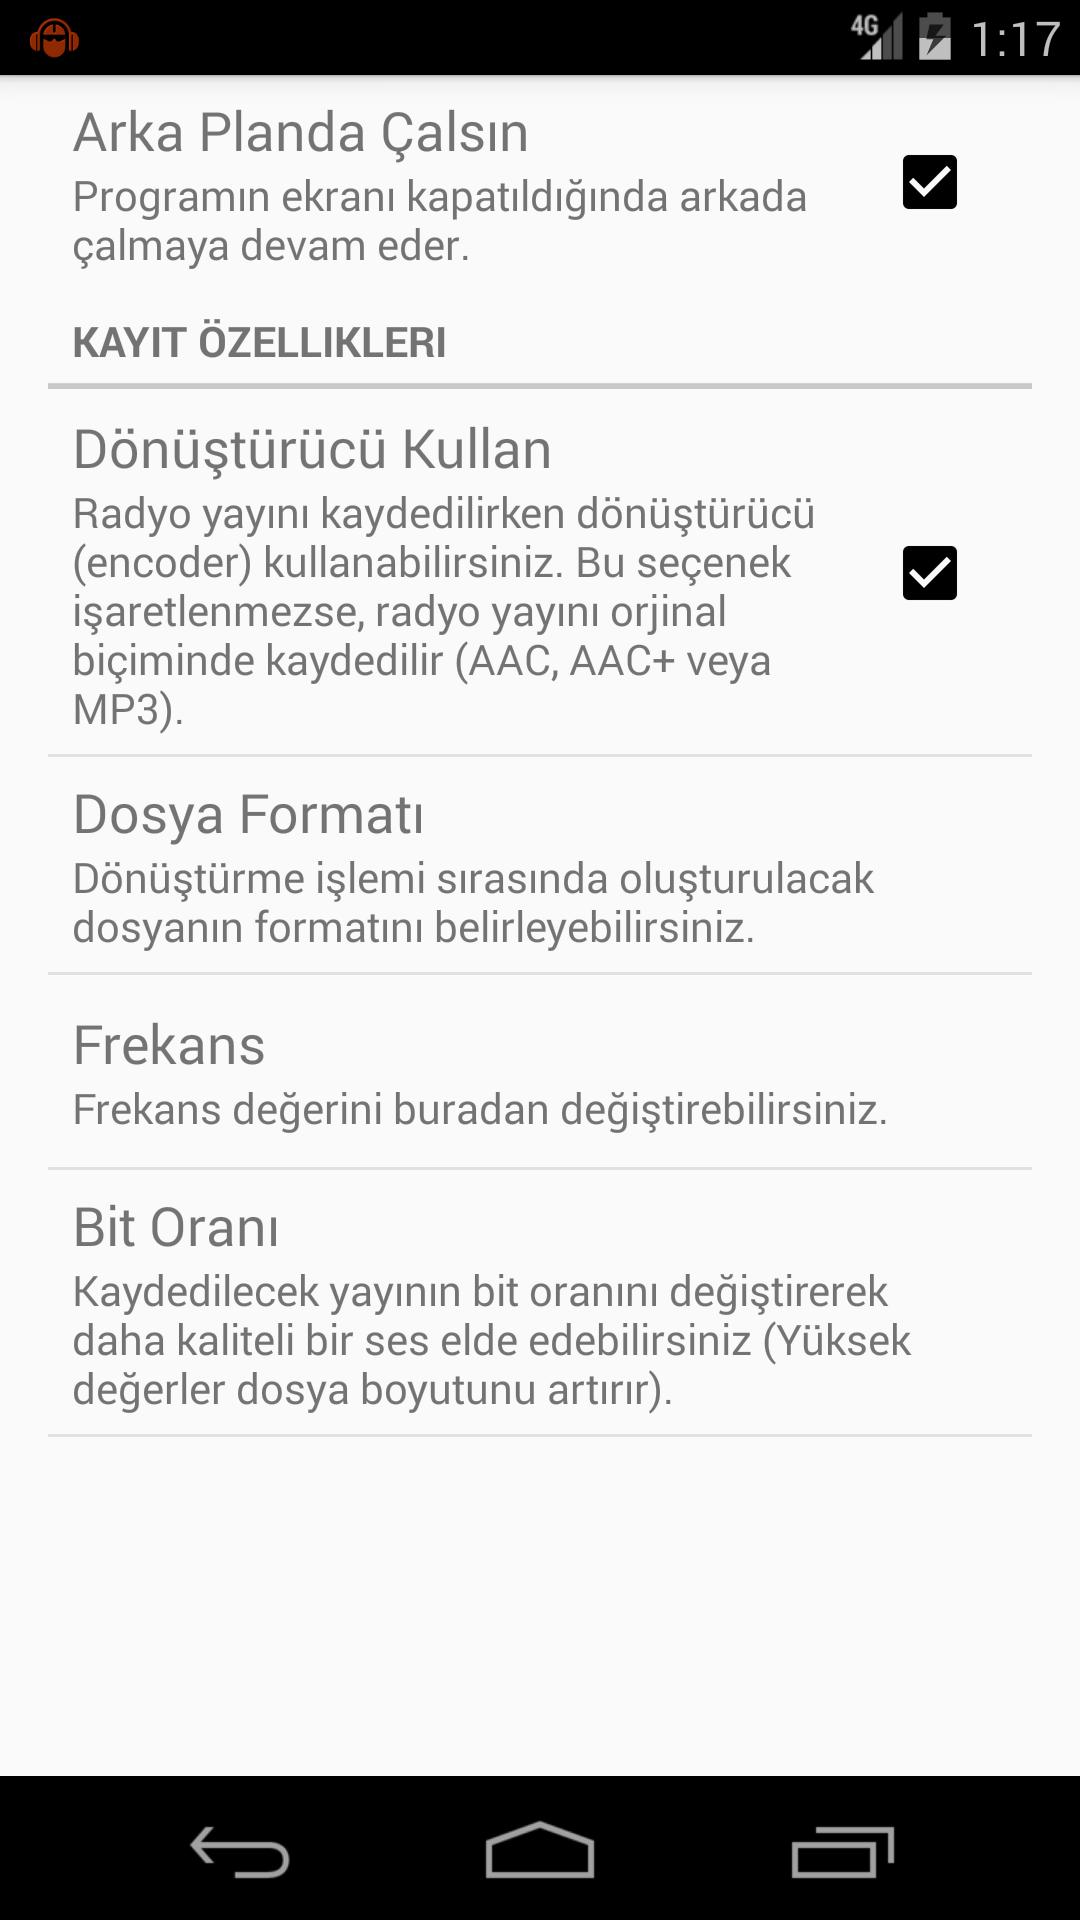 Radio Listen Record - RDK for Android - APK Download